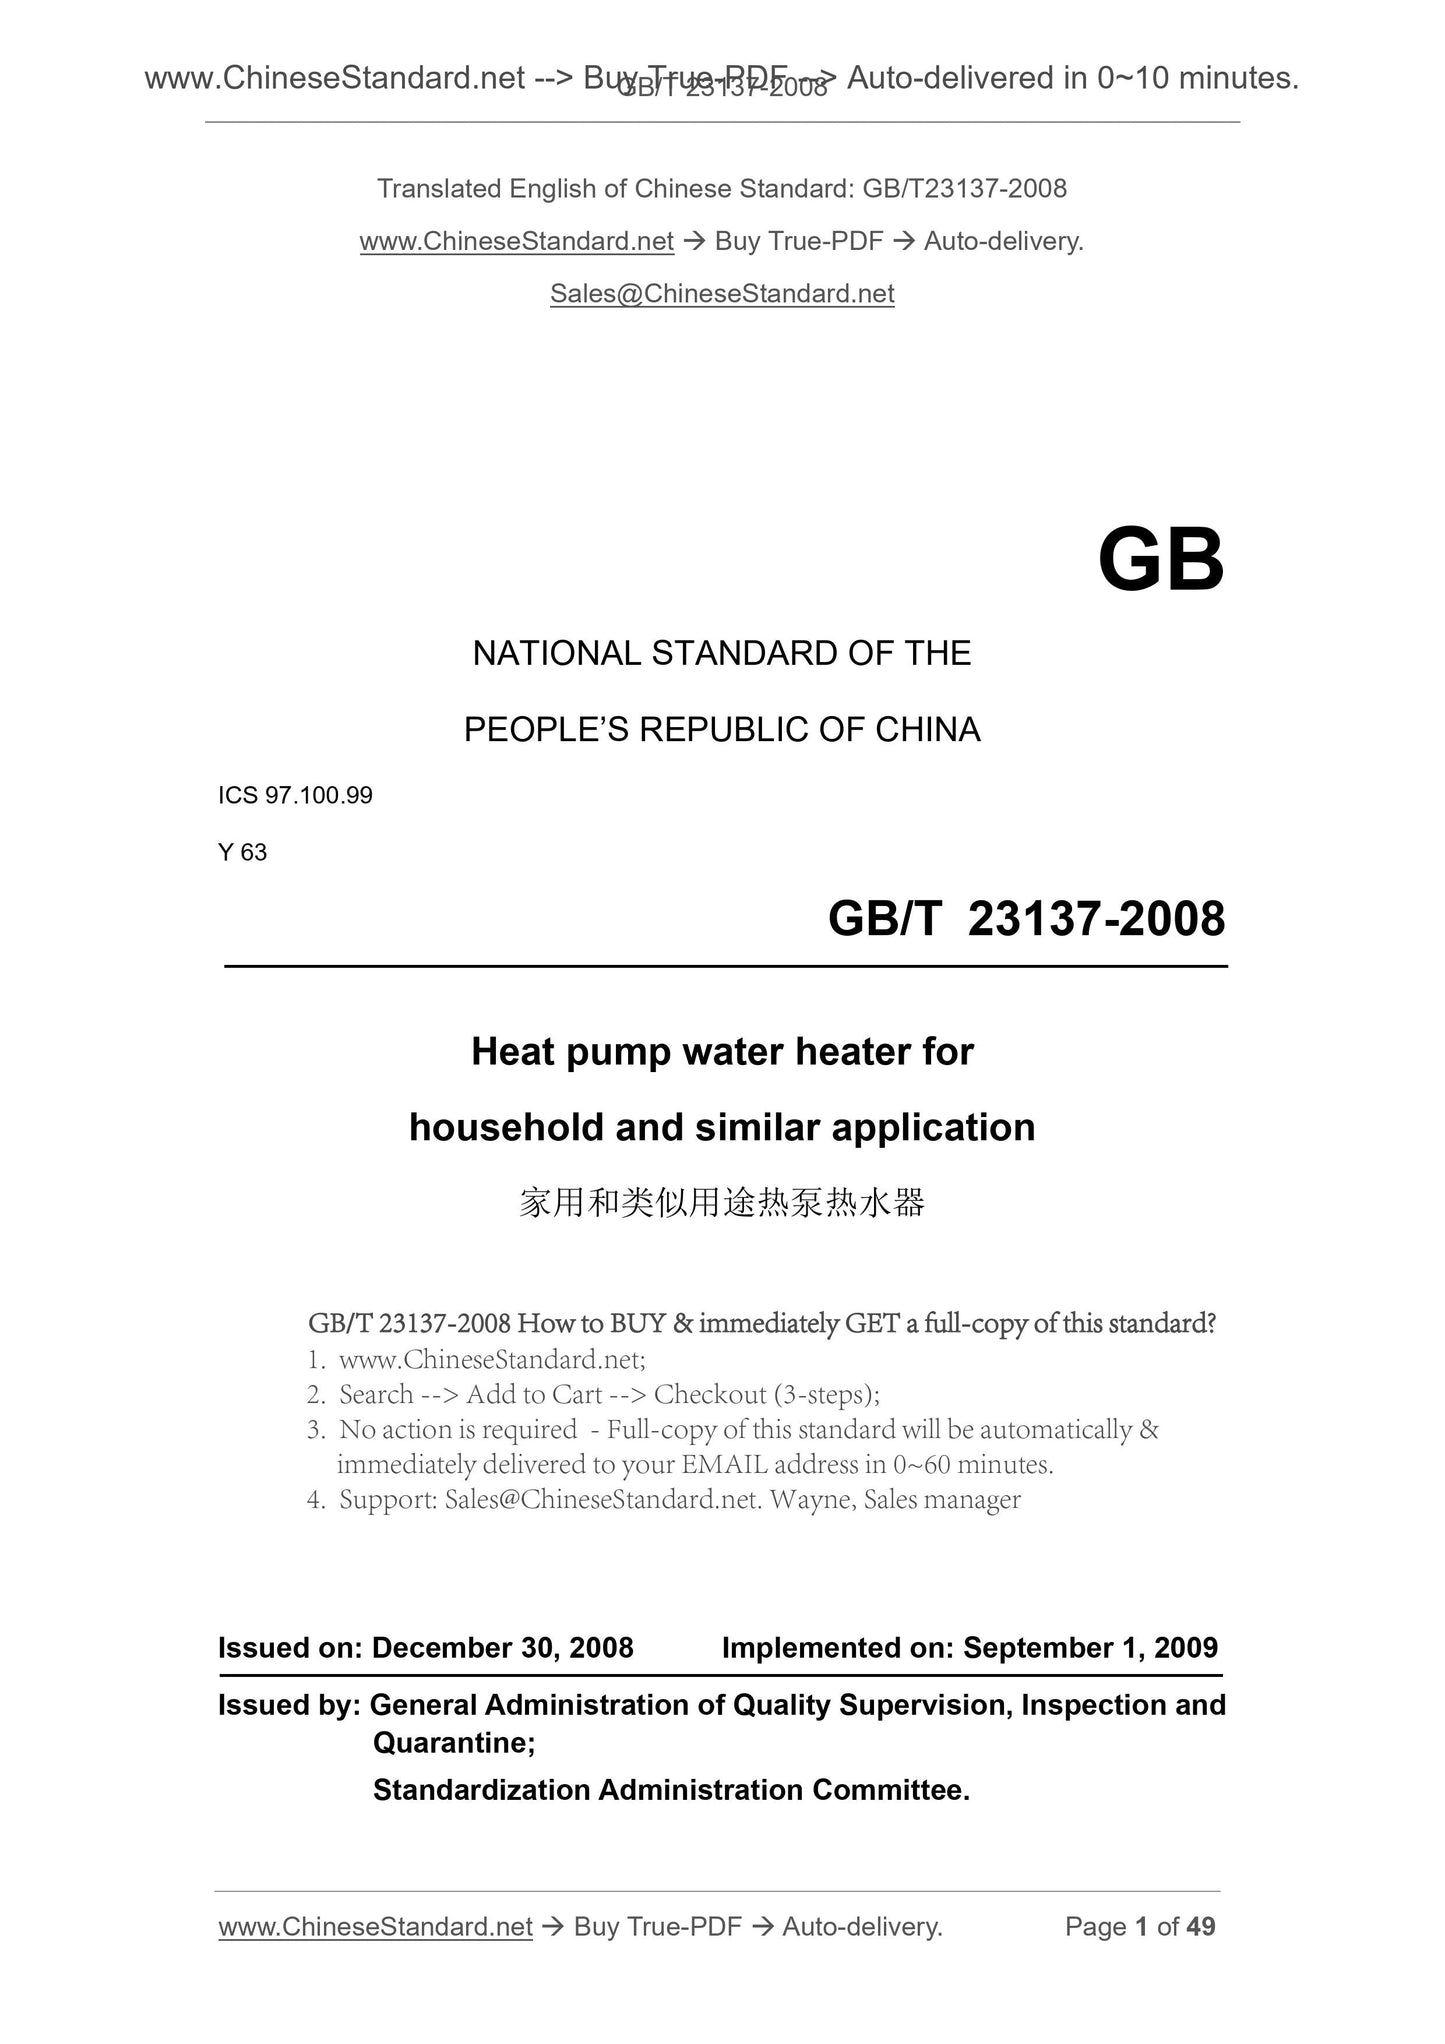 GB/T 23137-2008 Page 1